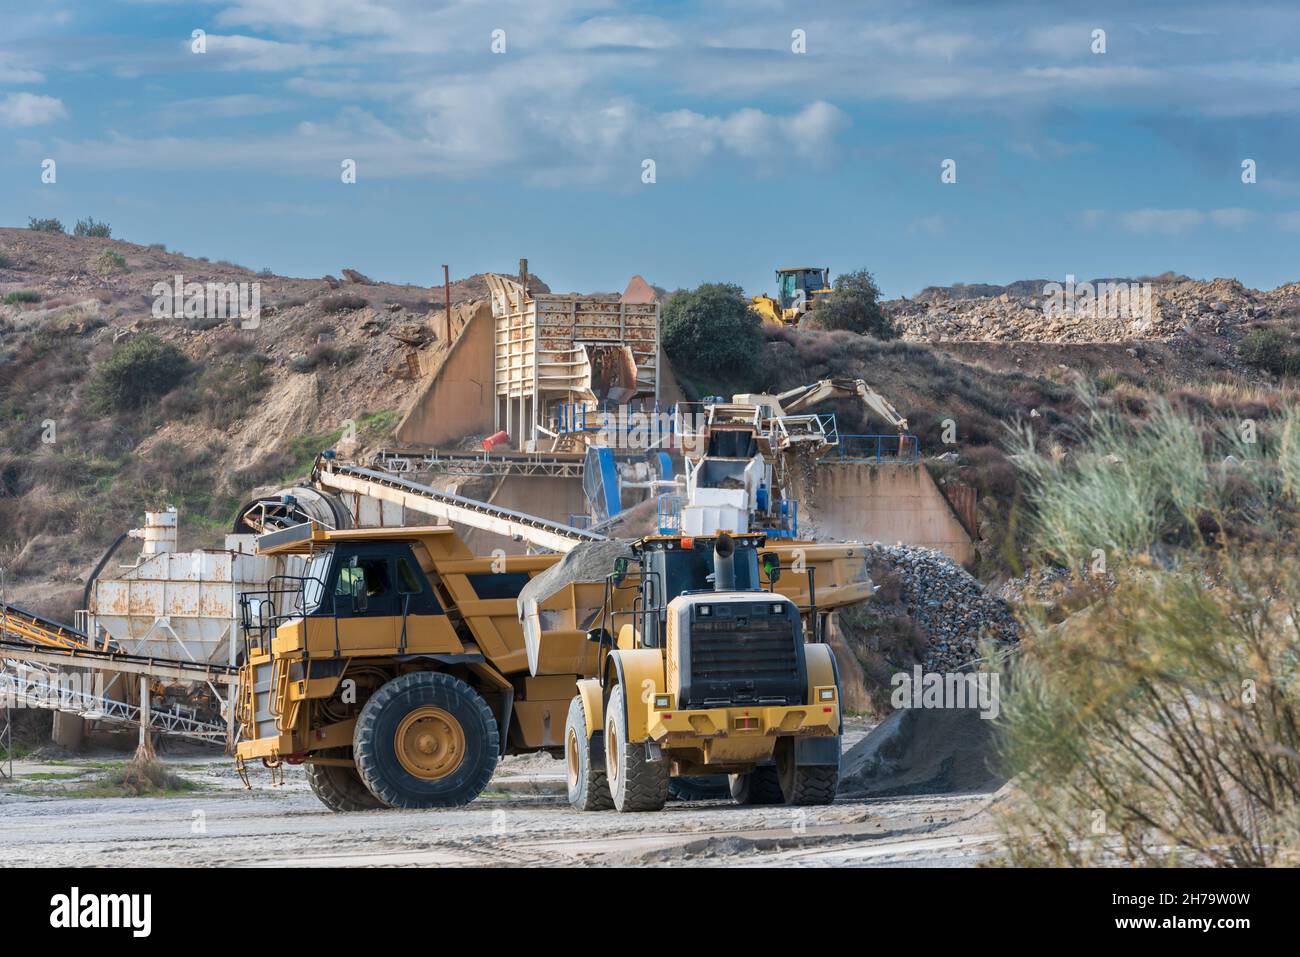 Excavator shovel loading a large dump truck in a sand and gravel quarry. Stock Photo